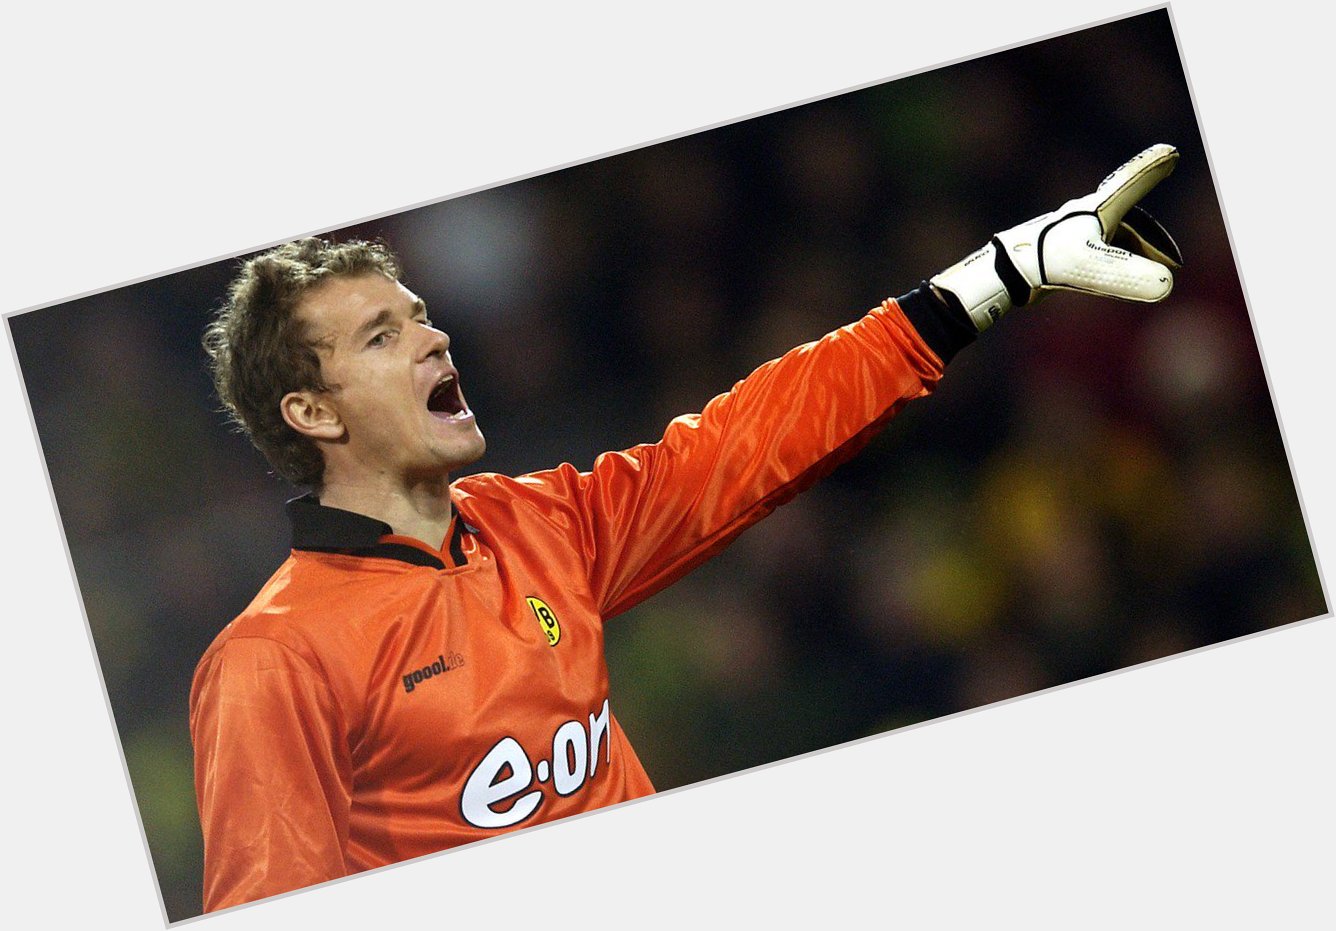 Happy Birthday to Jens Lehmann. 

Well done to who gave the fastest correct answer! 